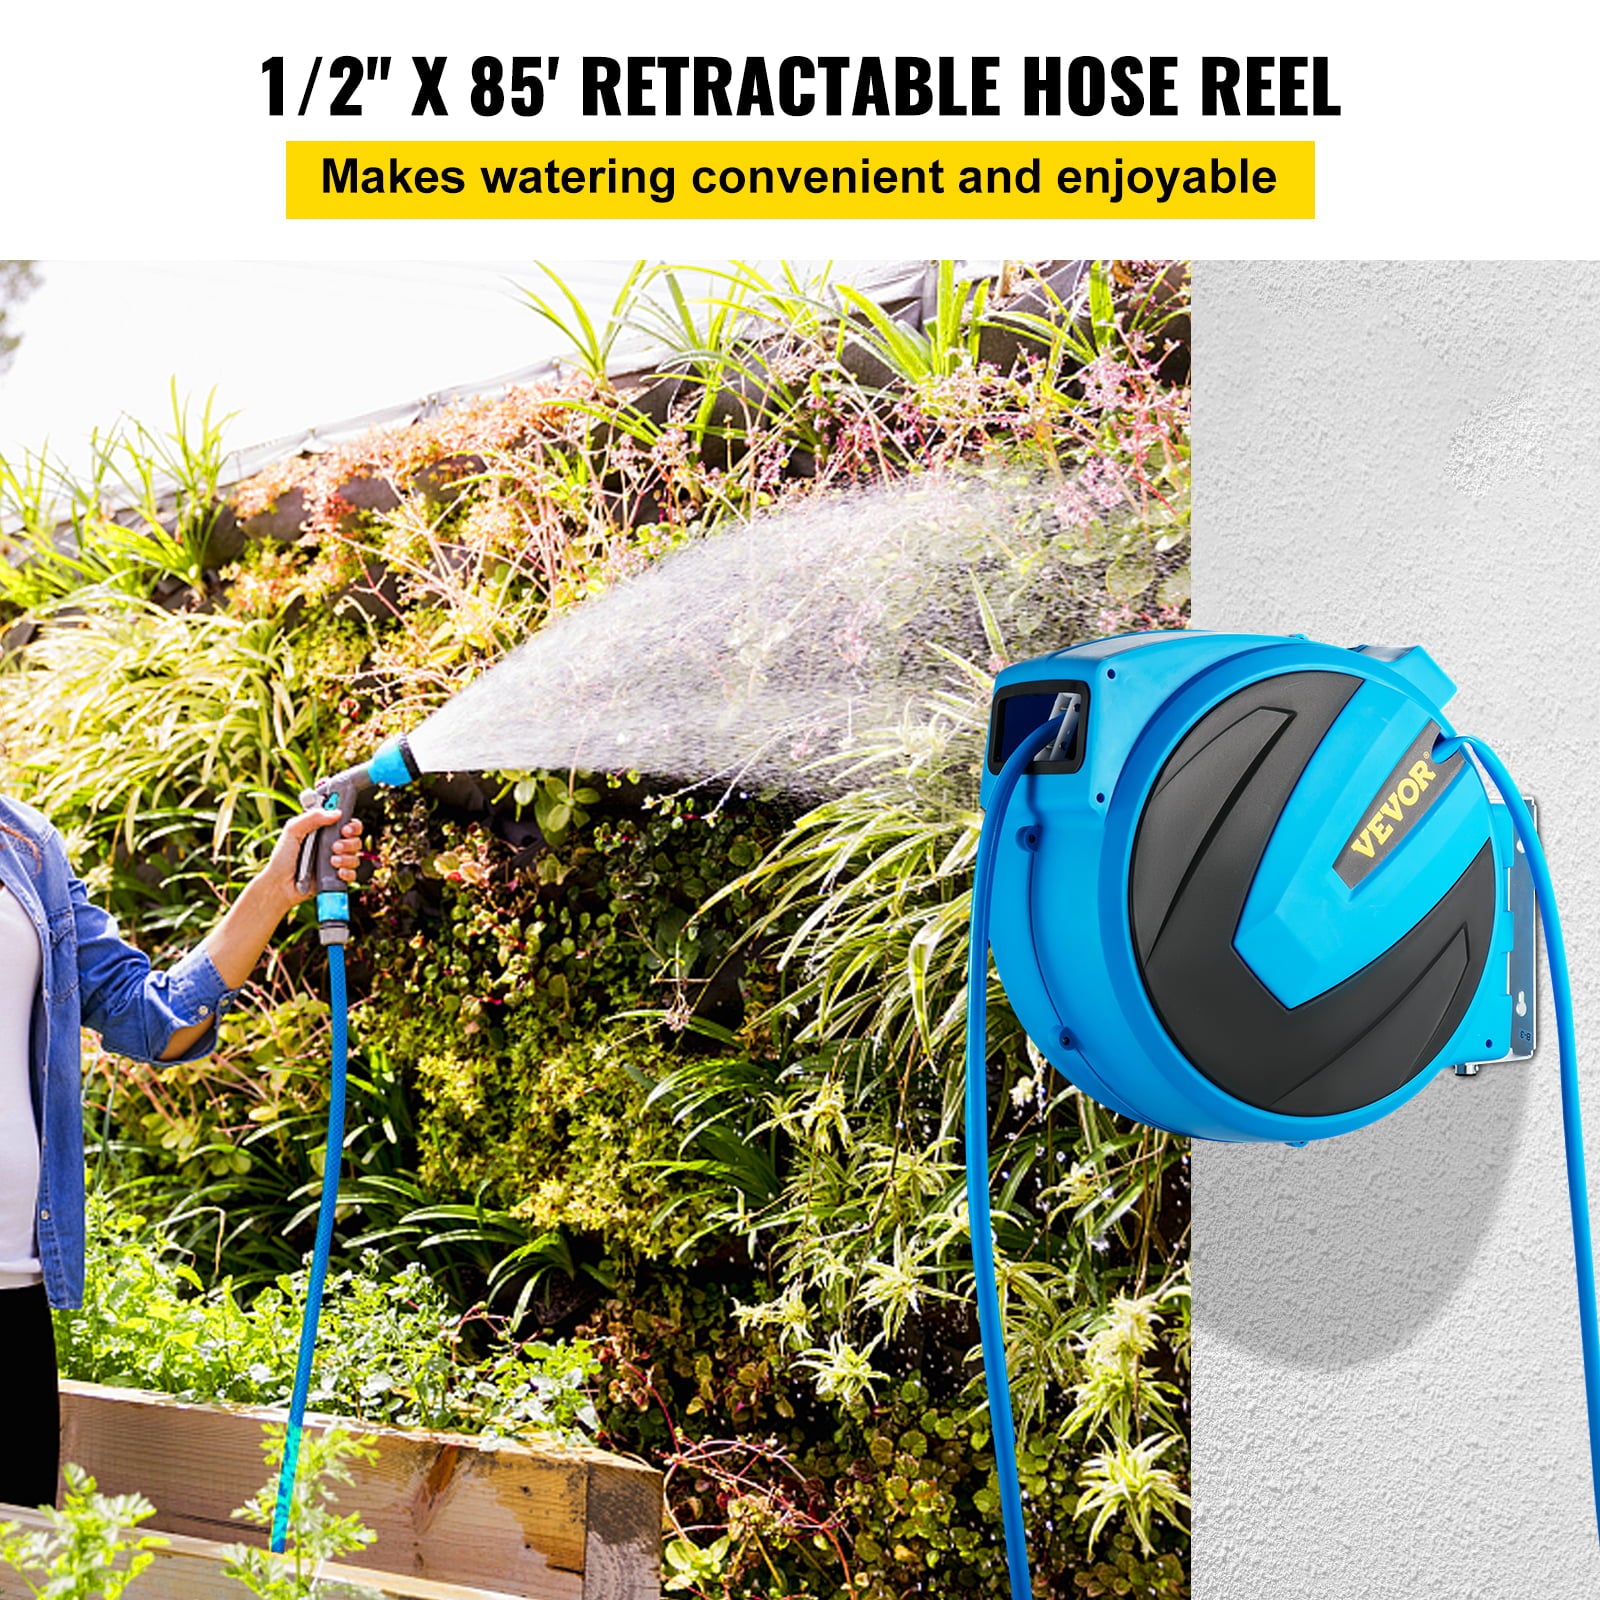 VEVOR Retractable Hose Reel， 1/2 inch x 85 ft， Any Length Lock and Automatic Rewind Water Hose， Wall Mounted Garden Hose Reel With 180° Swivel Bracket and 7 Pattern Hose Nozzle， Blue